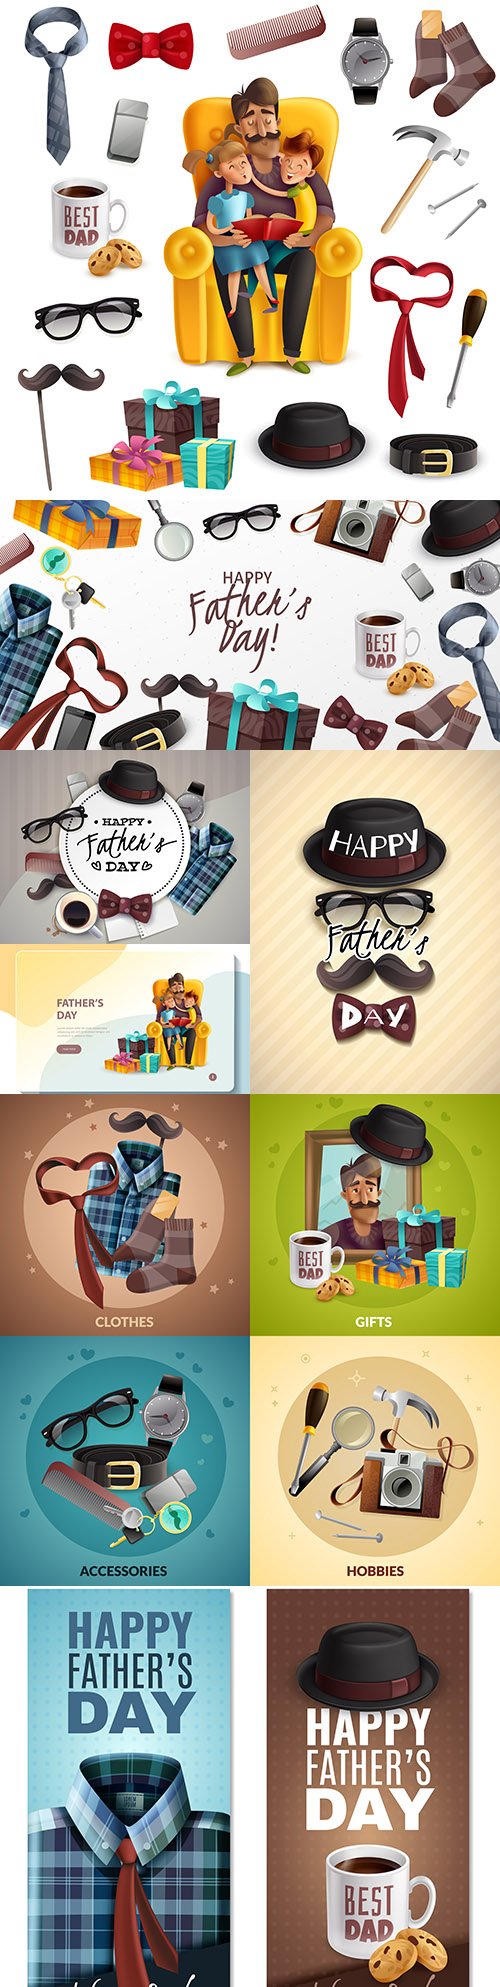 Happy Fathers Day postcard with men 's accessories